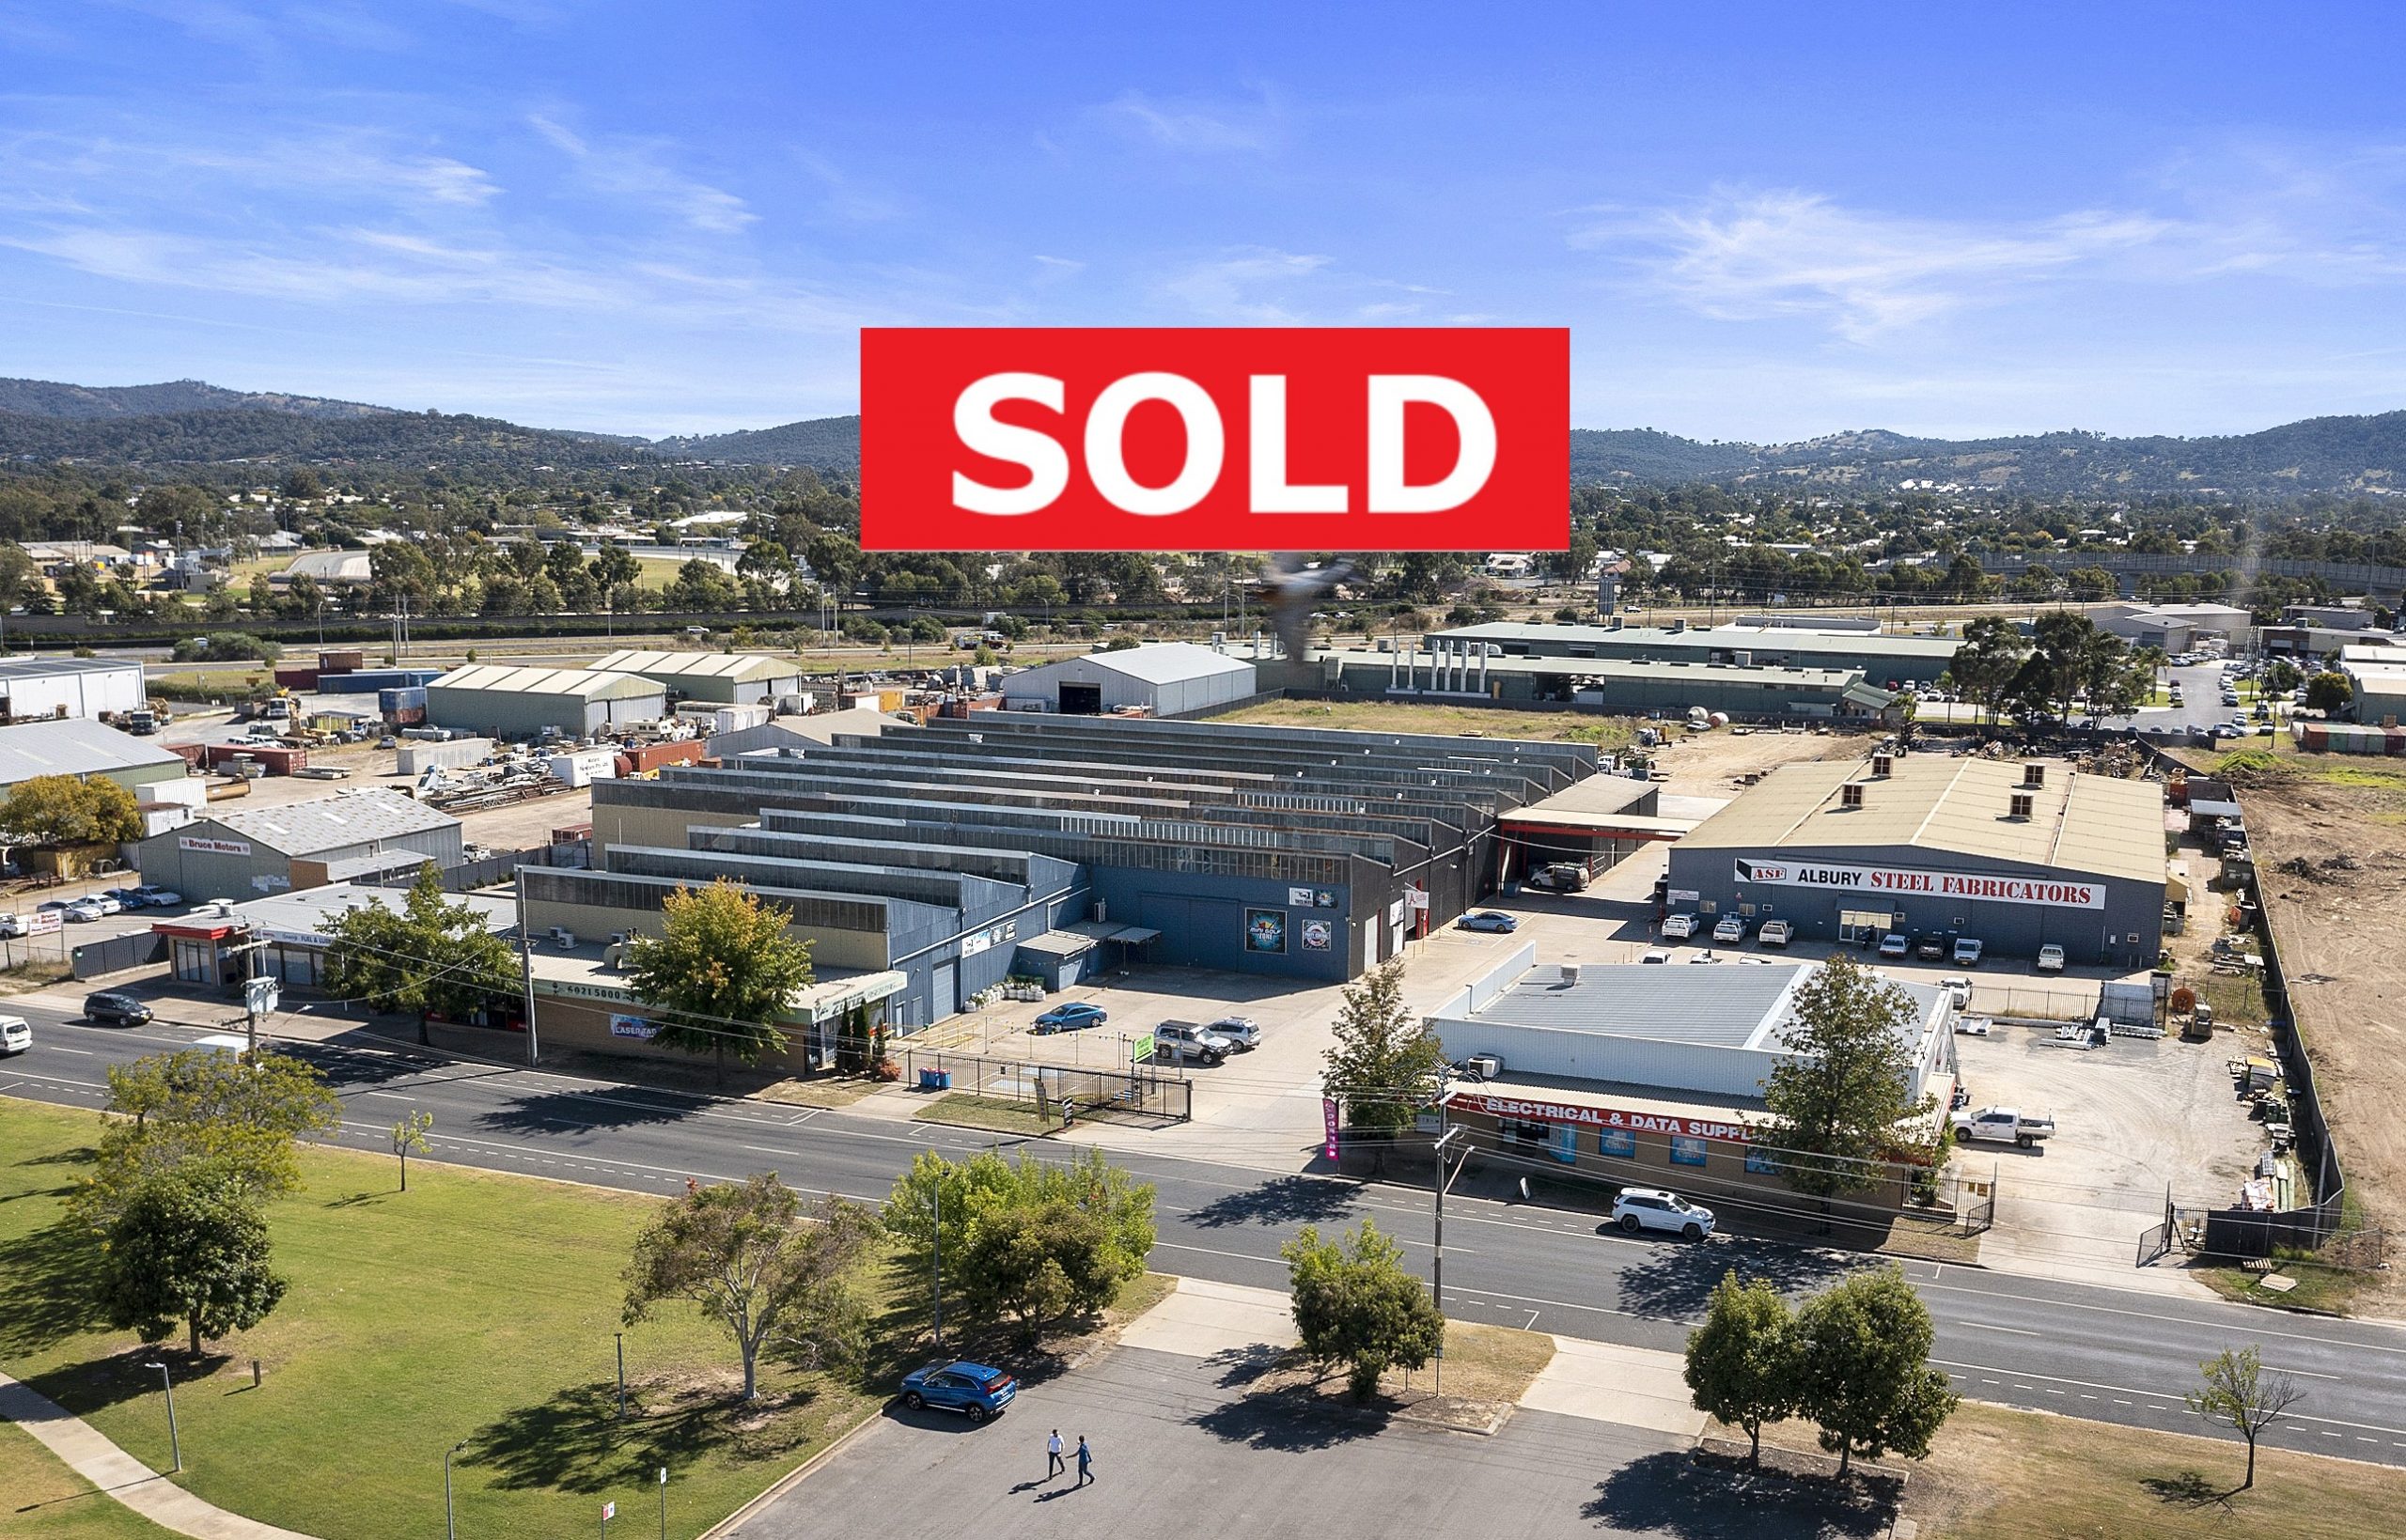 Business site $6.4m sale ‘outstanding’